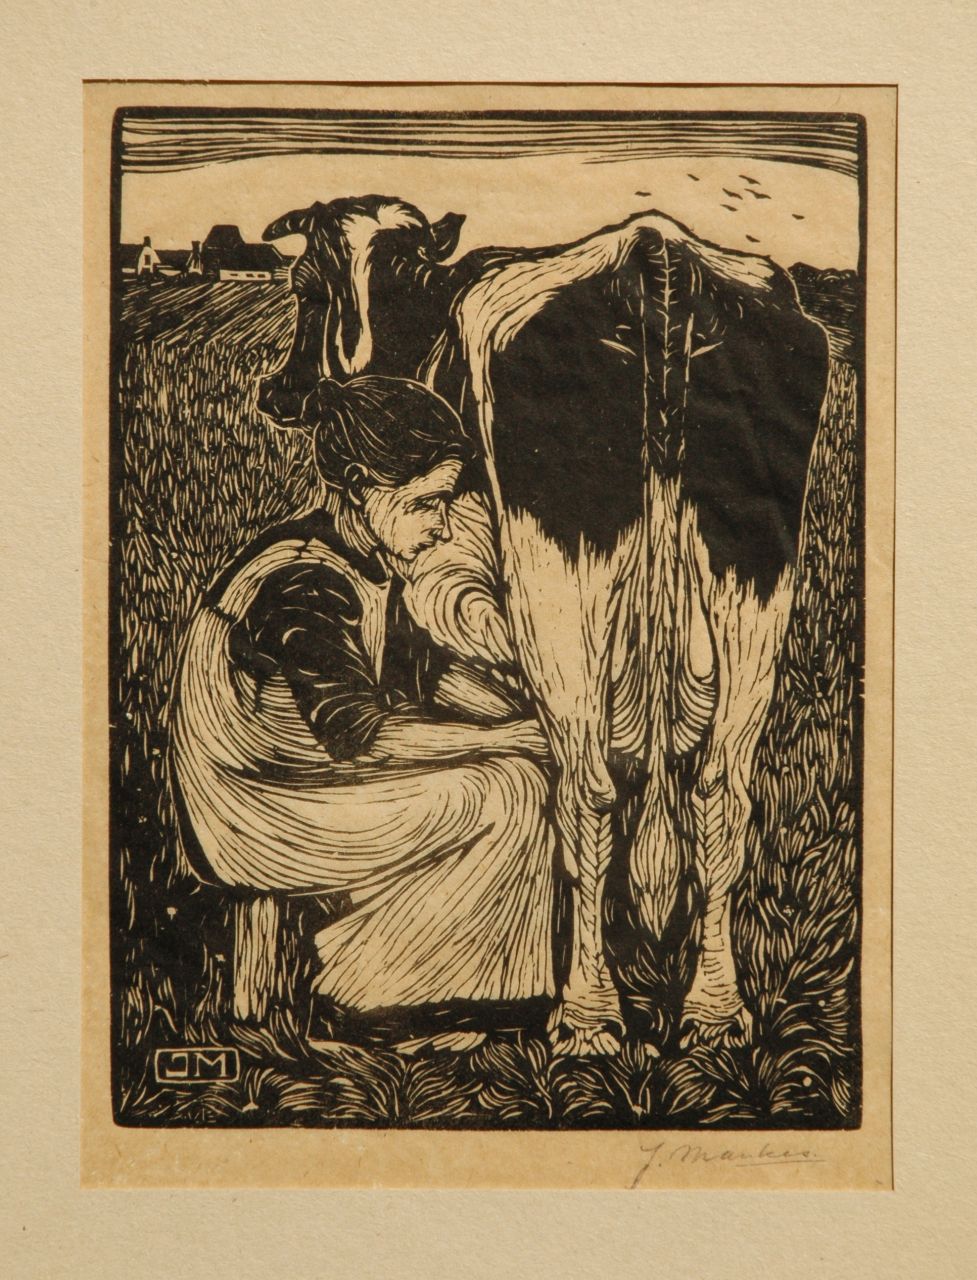 Mankes J.  | Jan Mankes, Milking a cow, woodcut on paper 19.2 x 14.2 cm, signed with mon in the block and l.r. in full (in pencil) and executed in 1914